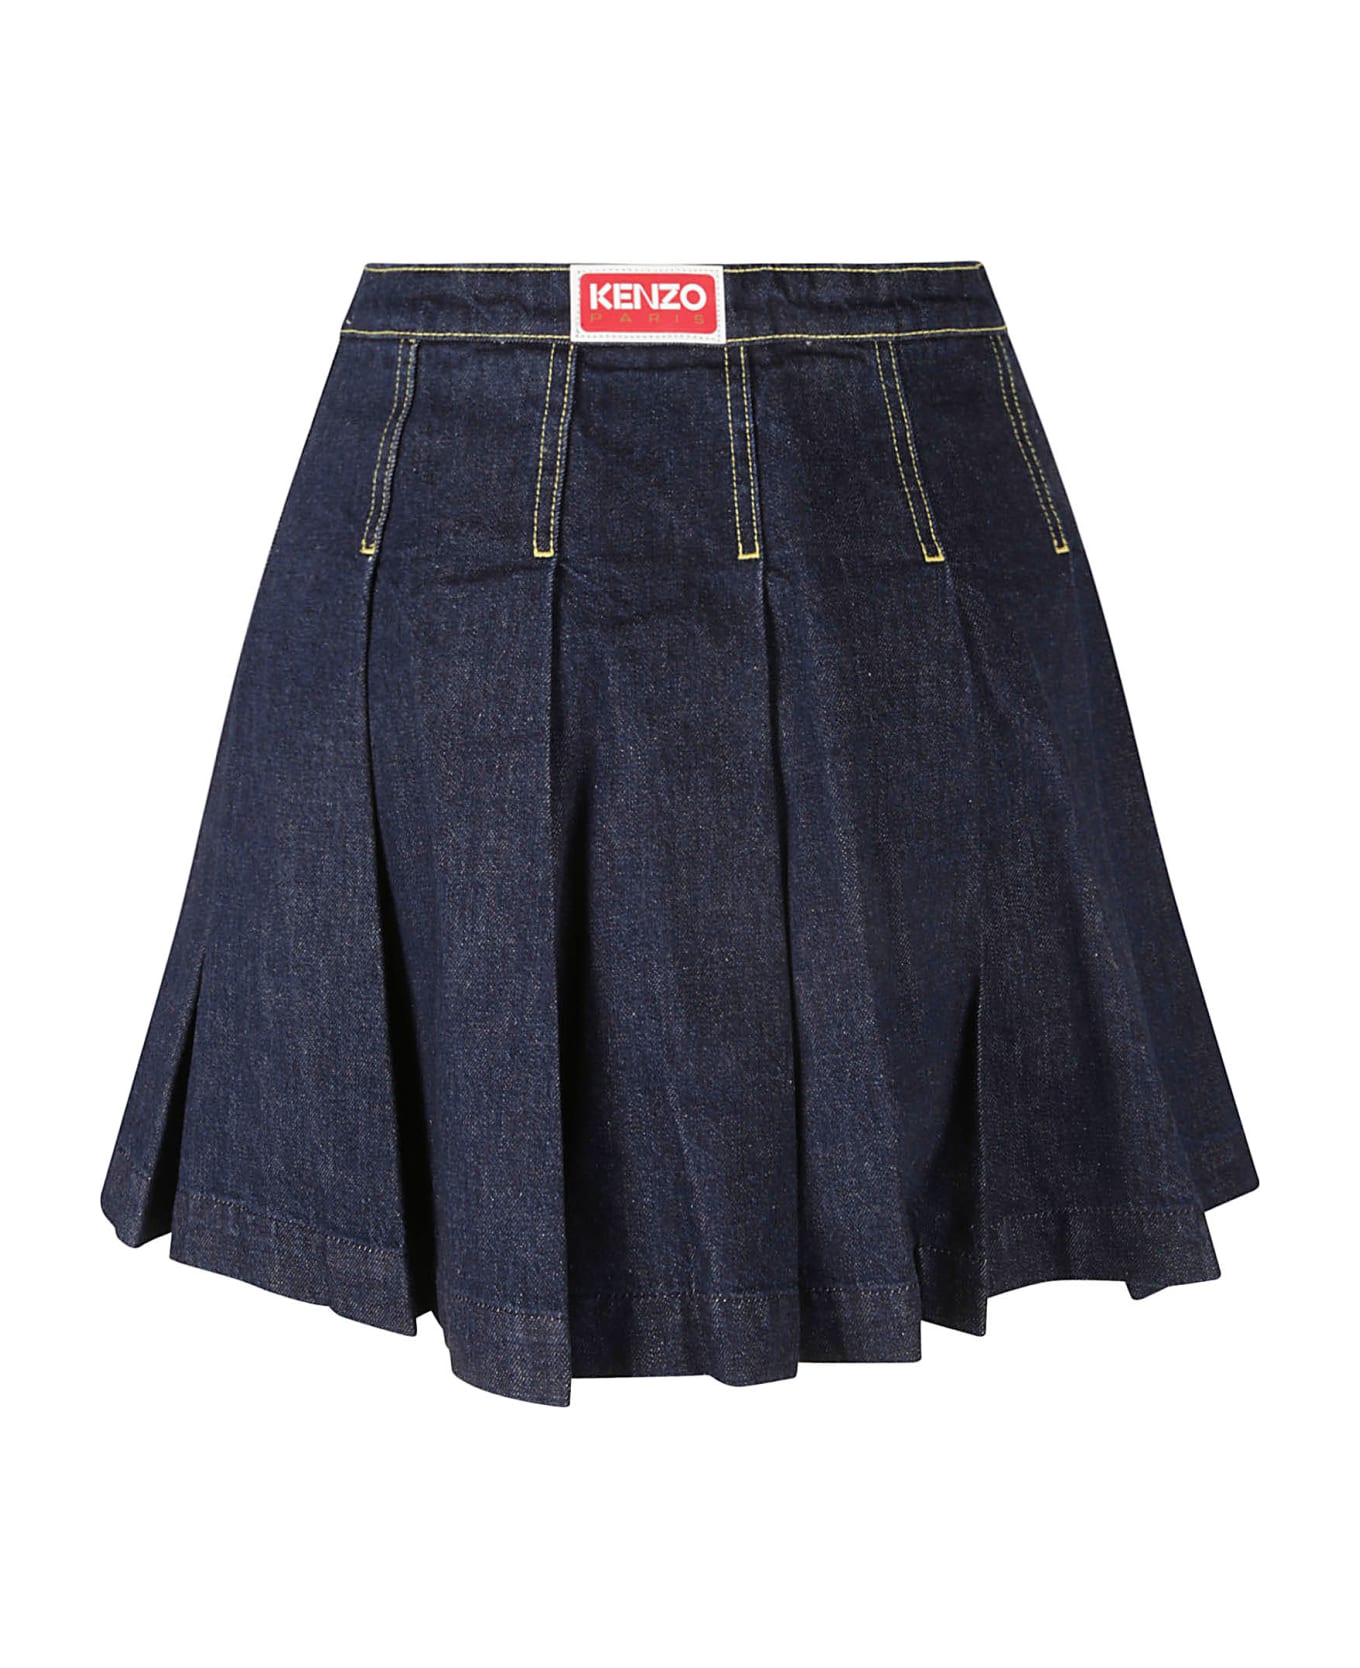 Kenzo Solid Fit & Flare Skirt - Rinse Blue スカート